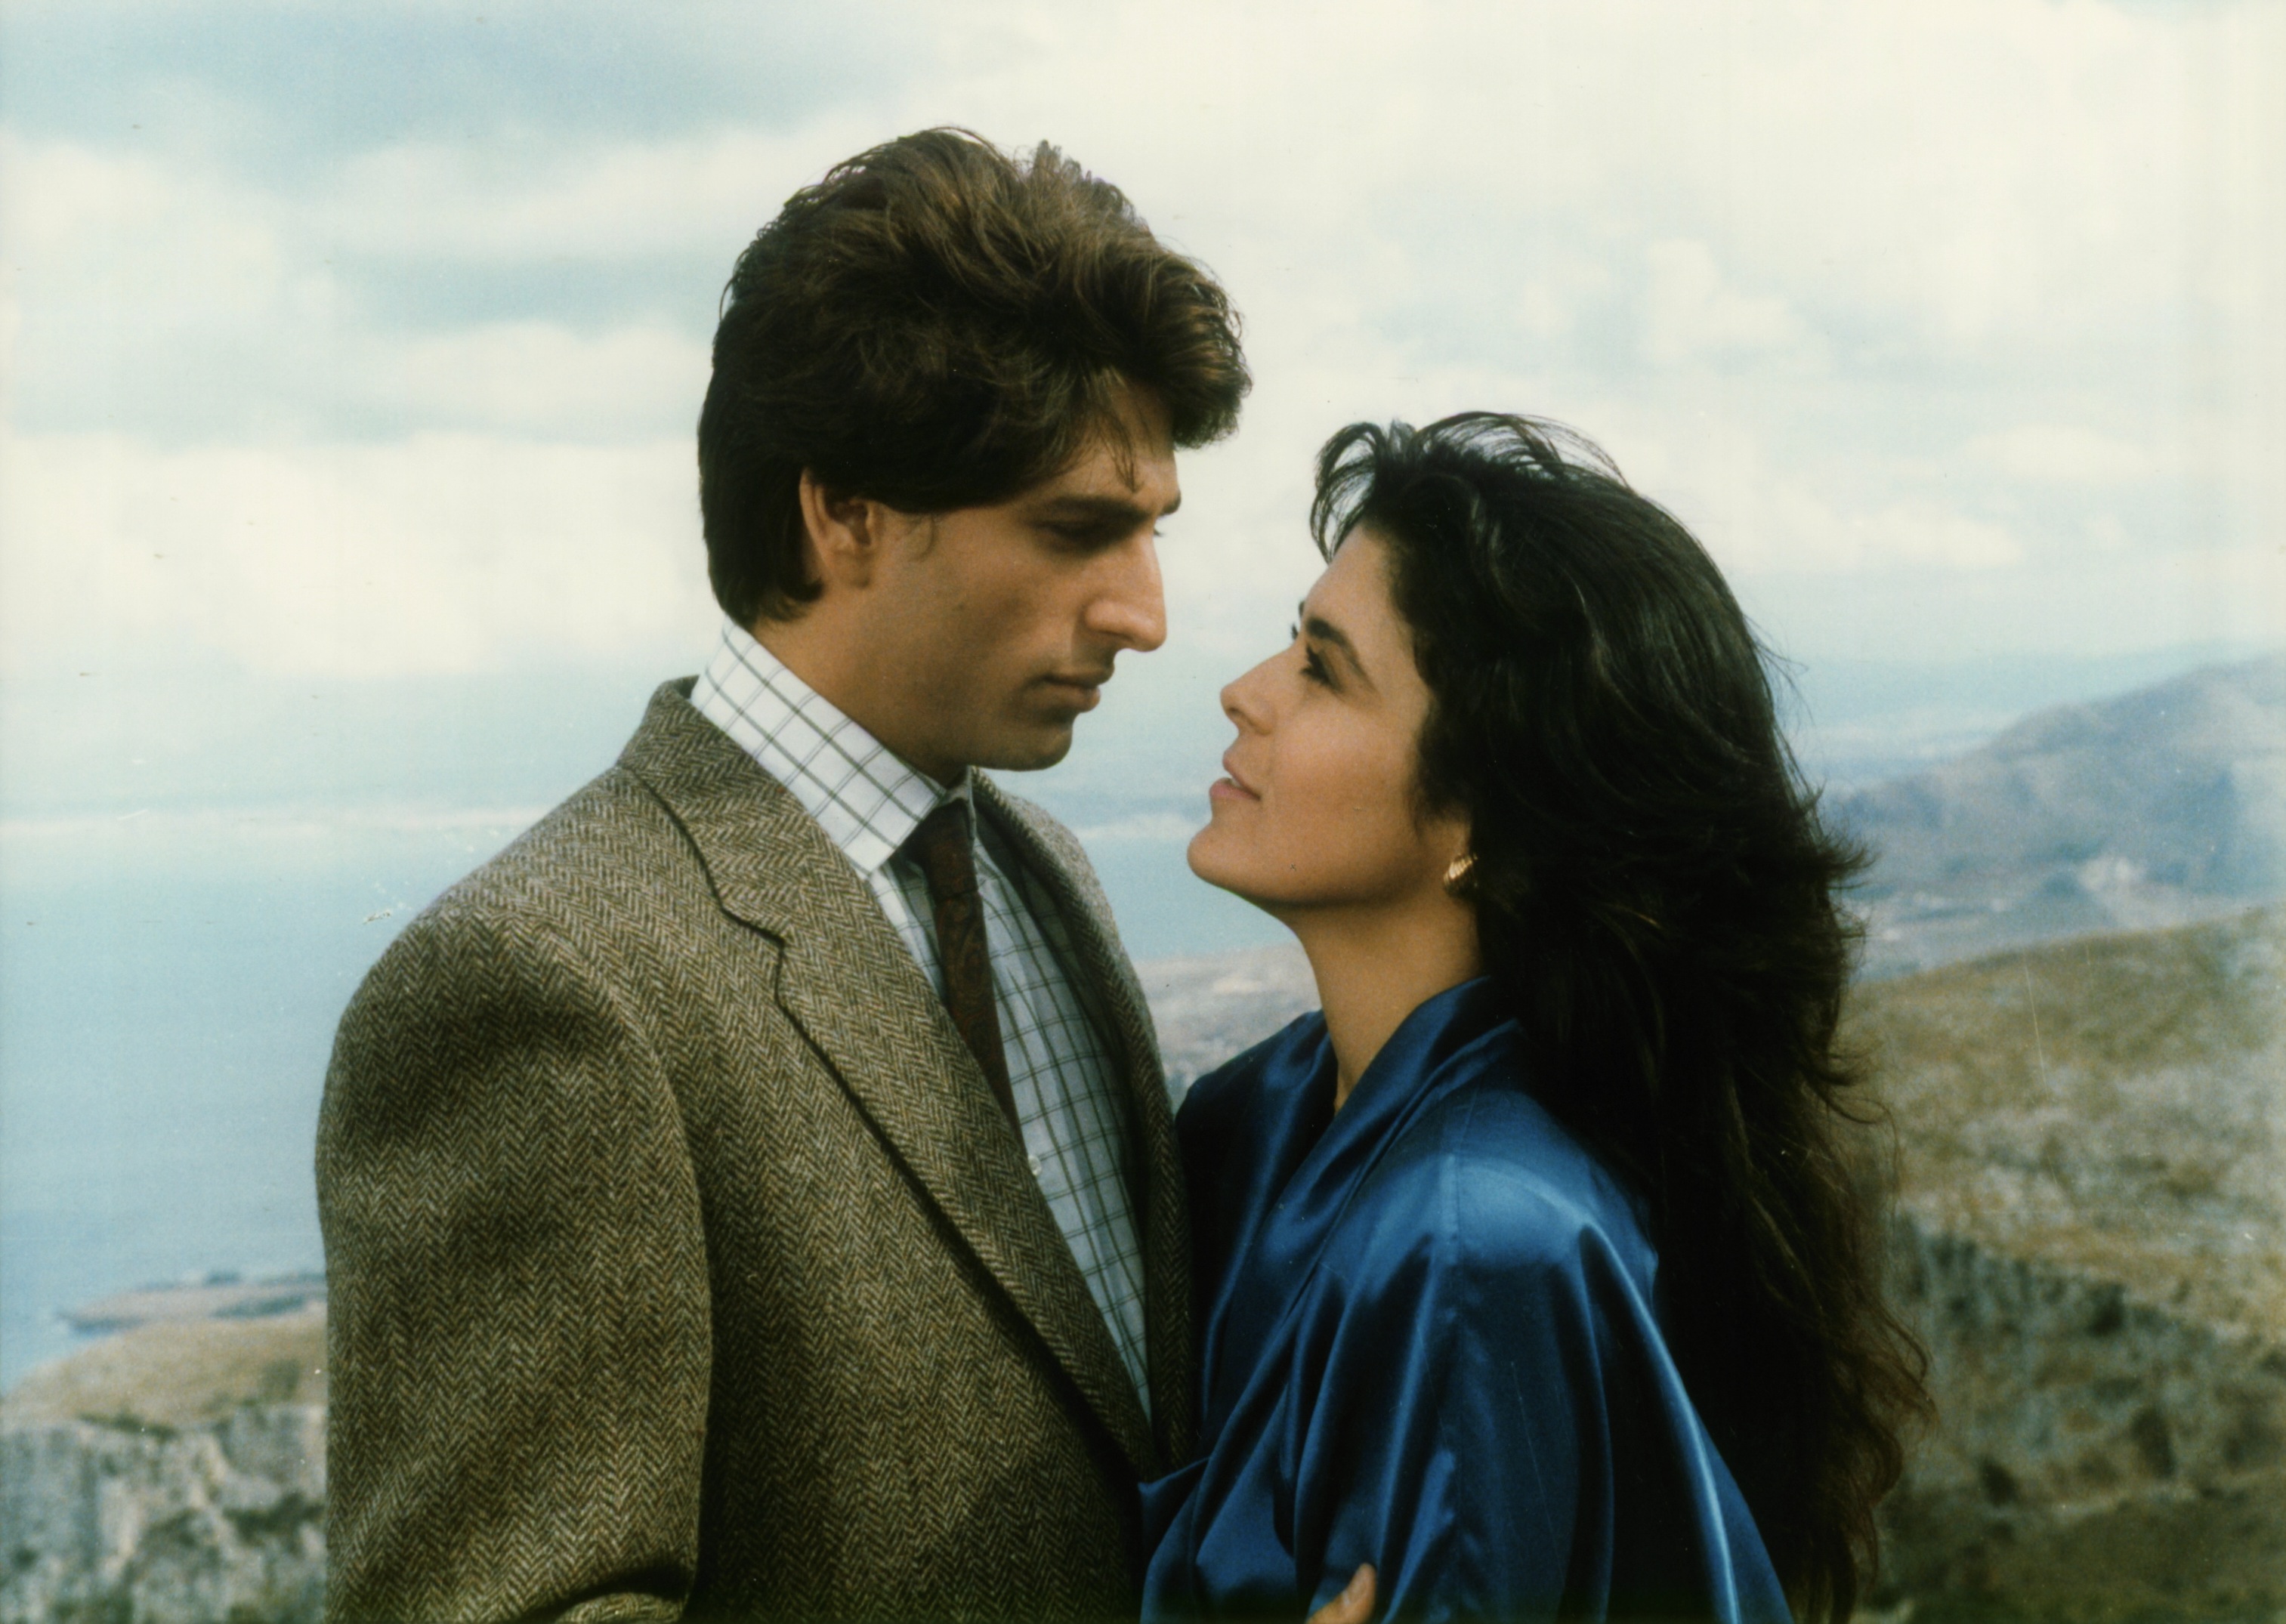 With Maria Conchita Alonso in Blood Ties